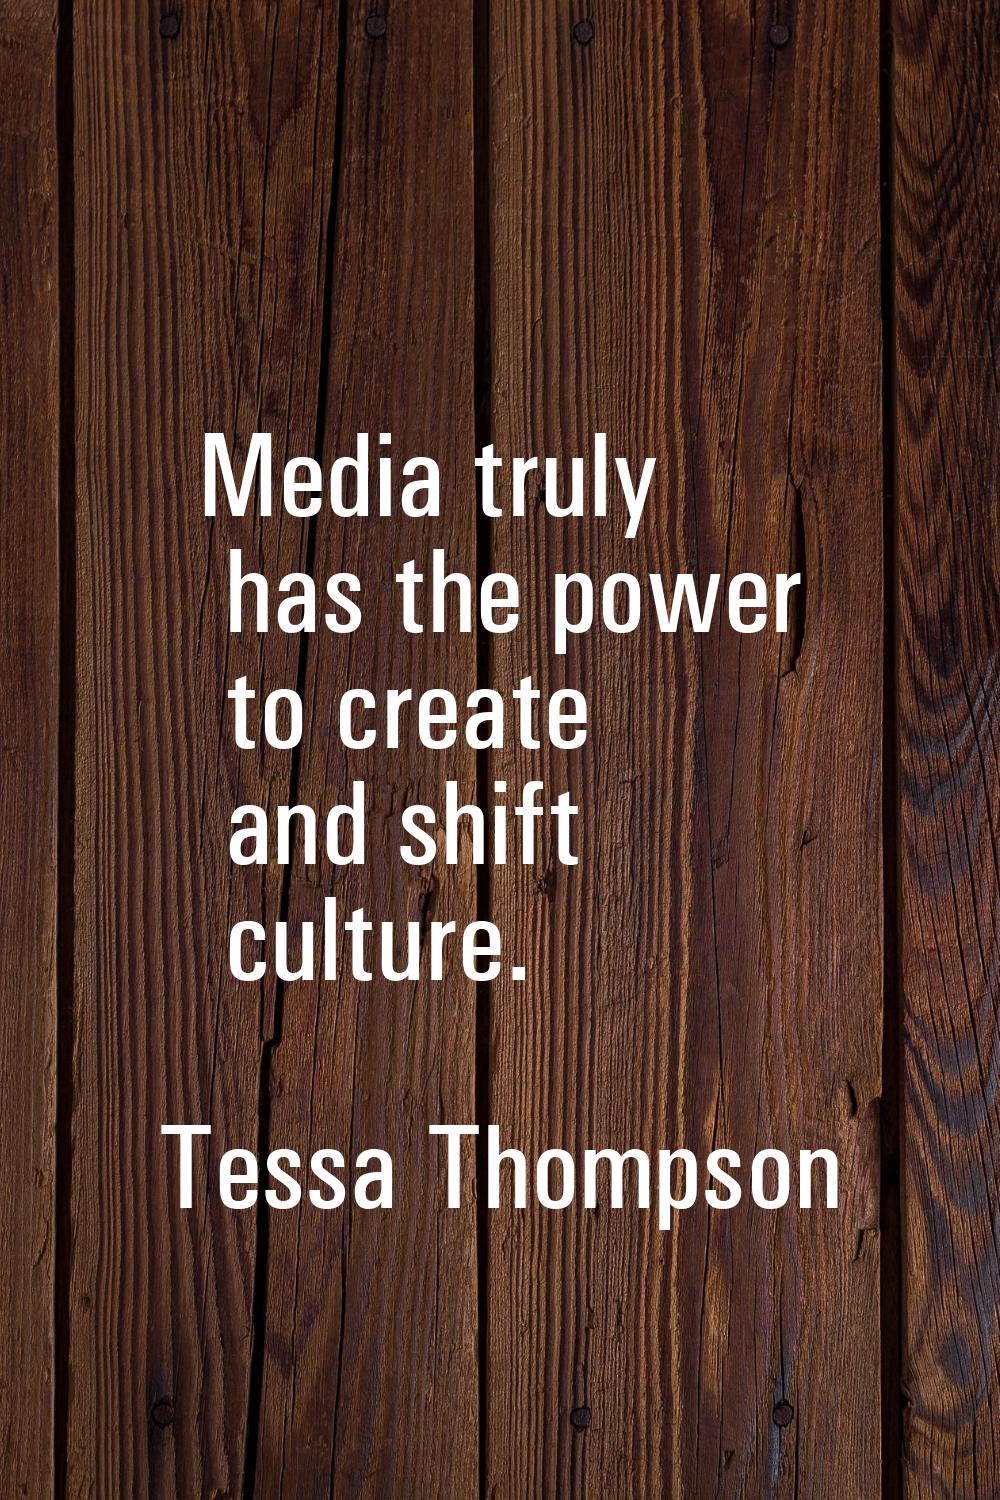 Media truly has the power to create and shift culture.